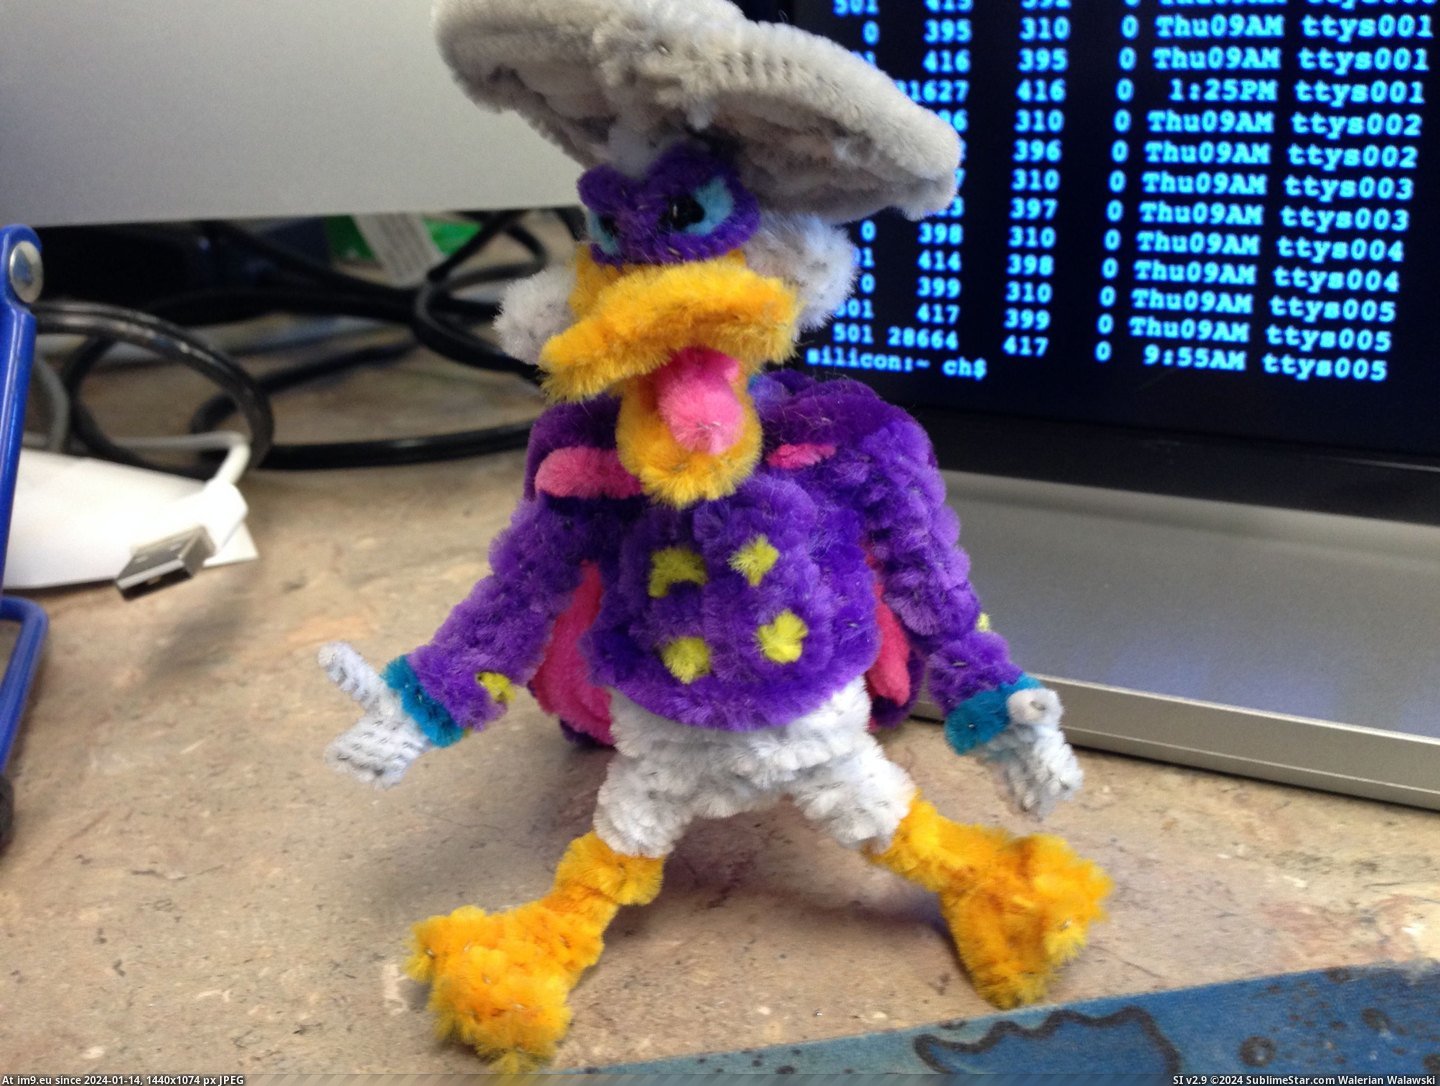 #State #Alaska #Duck #Cleaners #Darkwing #Created #Pipe #Fair [Pics] Darkwing Duck created entirely with pipe cleaners. Found at the Alaska State Fair. Pic. (Image of album My r/PICS favs))